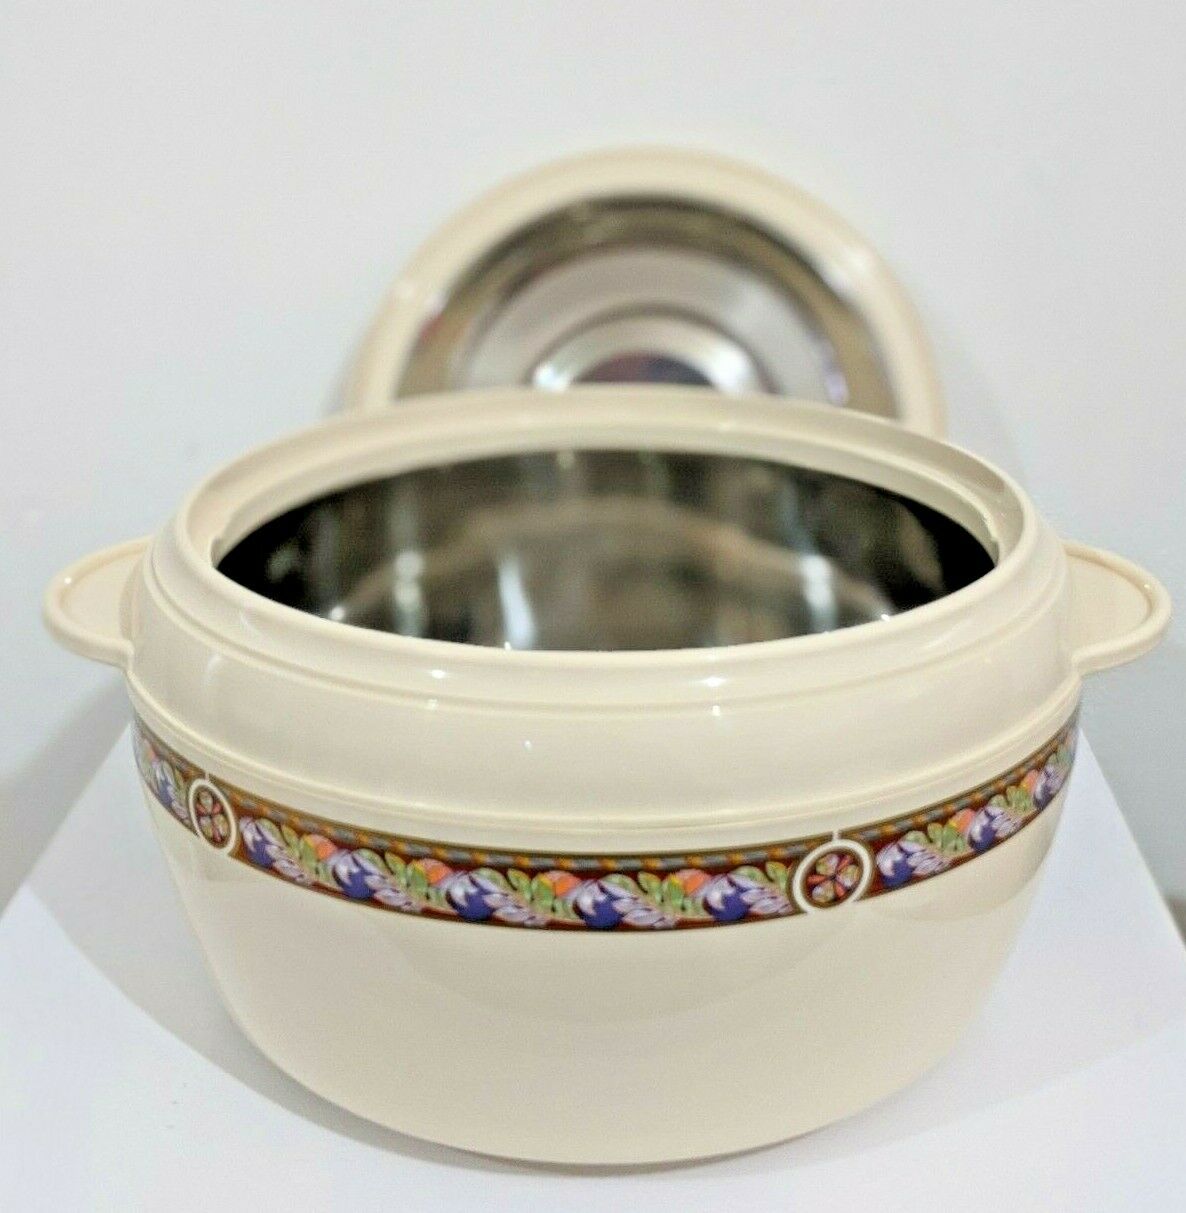 Karishma Insulated Casserole Hot Pot Serving Bowl With Lid-Food Warmer